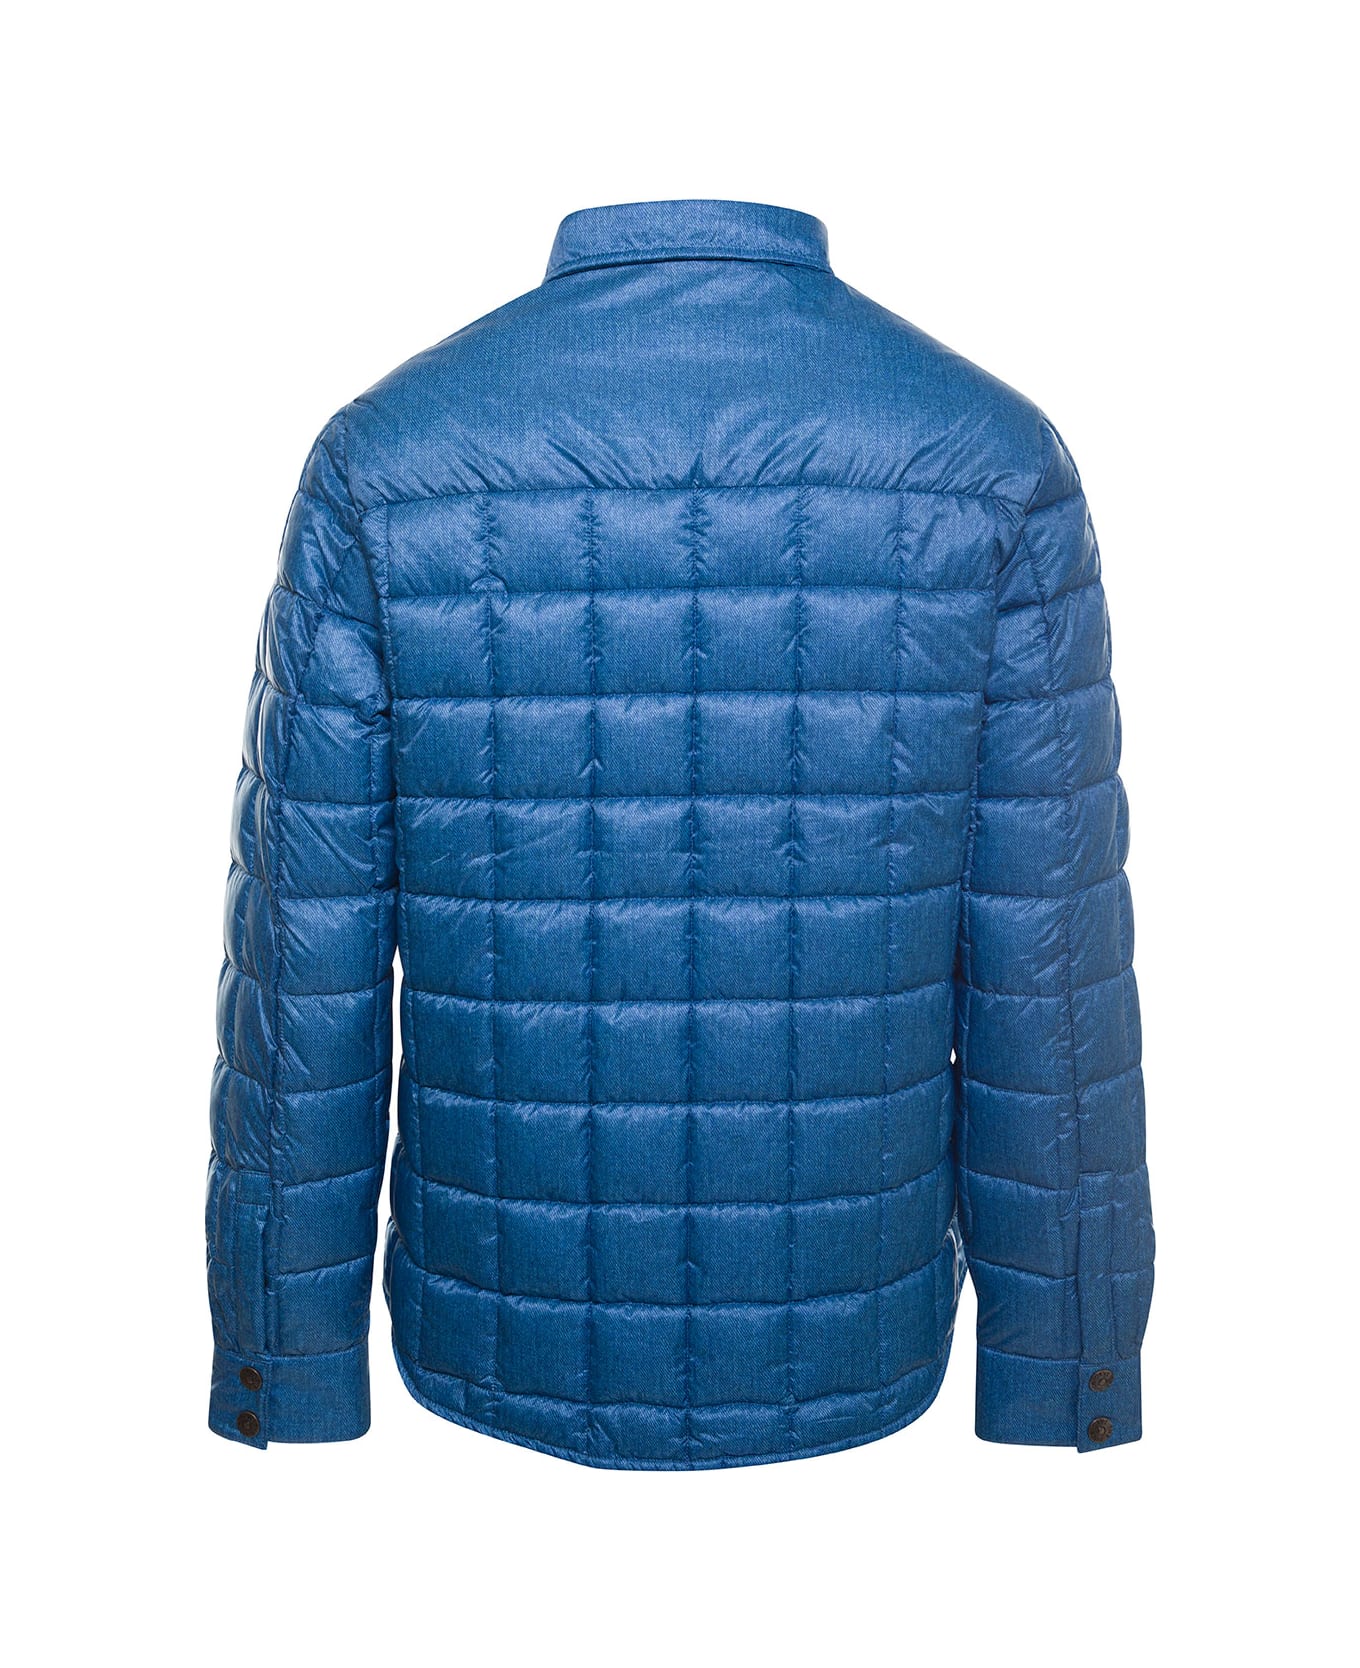 Save the Duck Blue Quilted Down Jacket With Logo Patch In Denim Printed Nylon Man - Blu ダウンジャケット